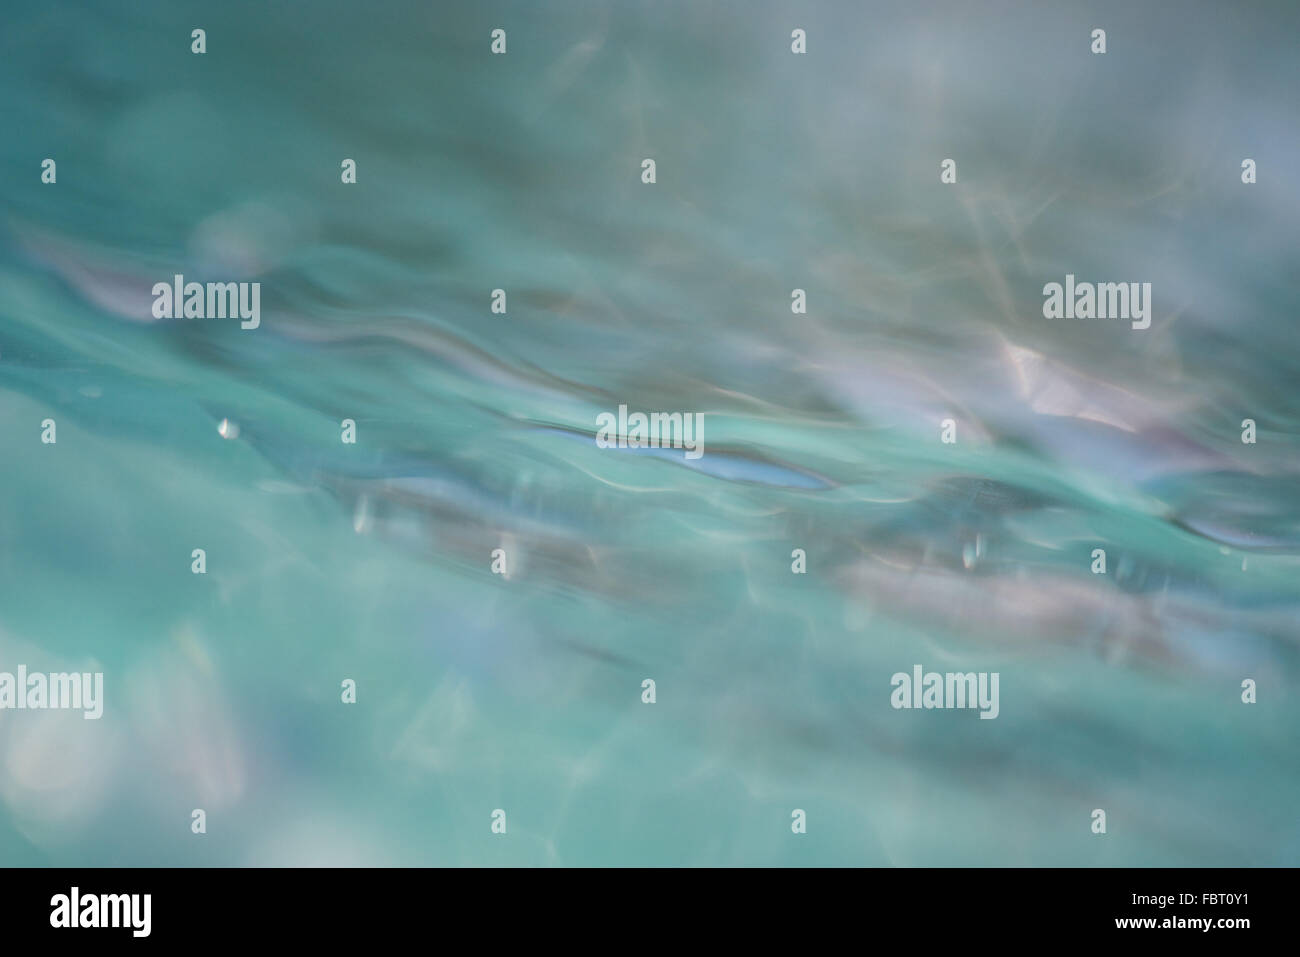 Close-up of rippled water surface Stock Photo